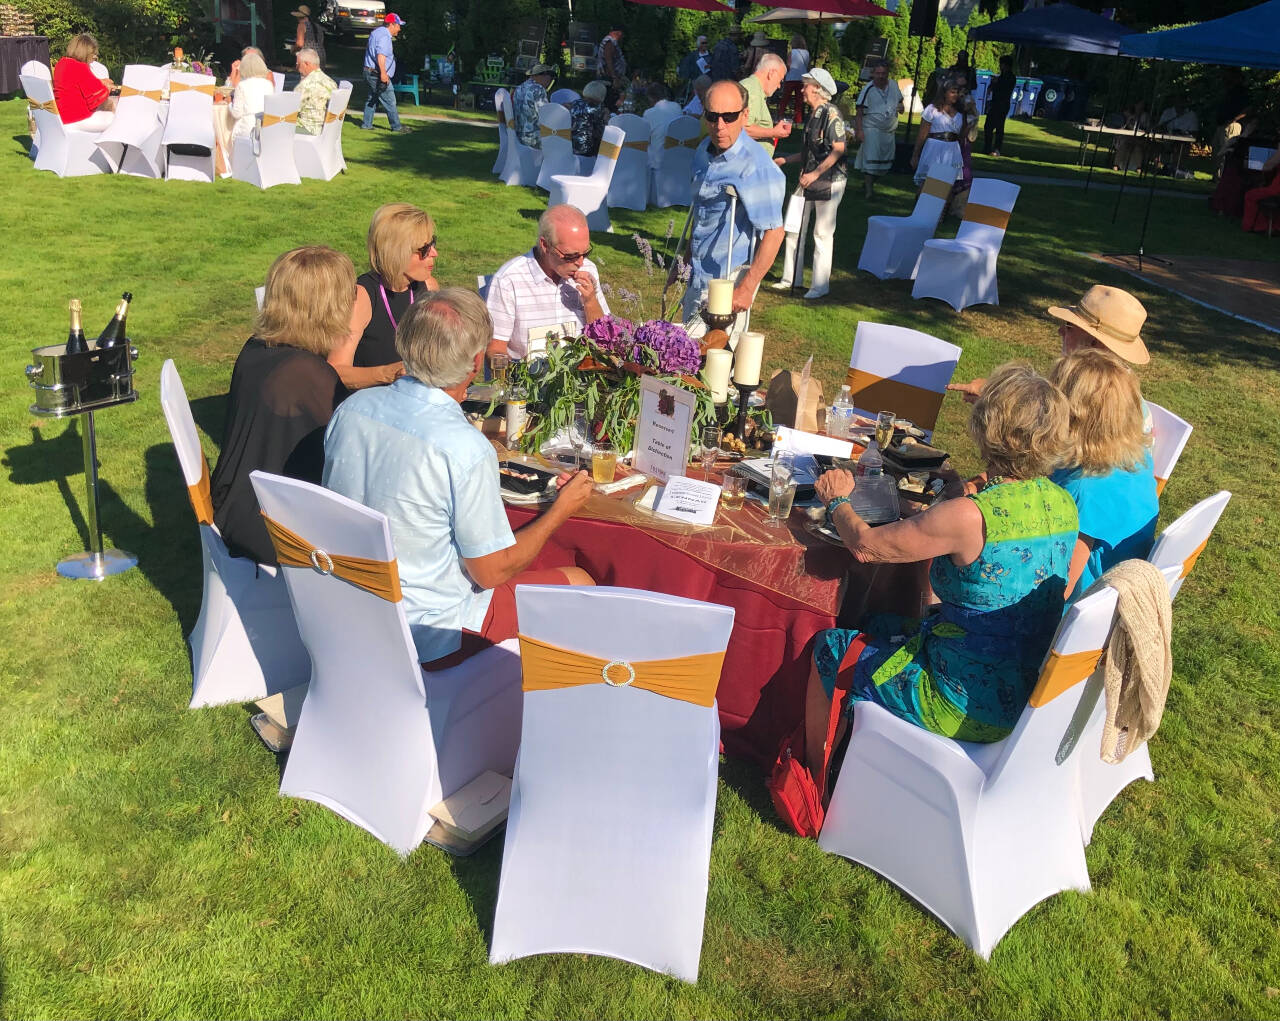 Attendees gathered around tables for food and conversation during the 2021 FUSION arts festival at Dumas Bay Centre.